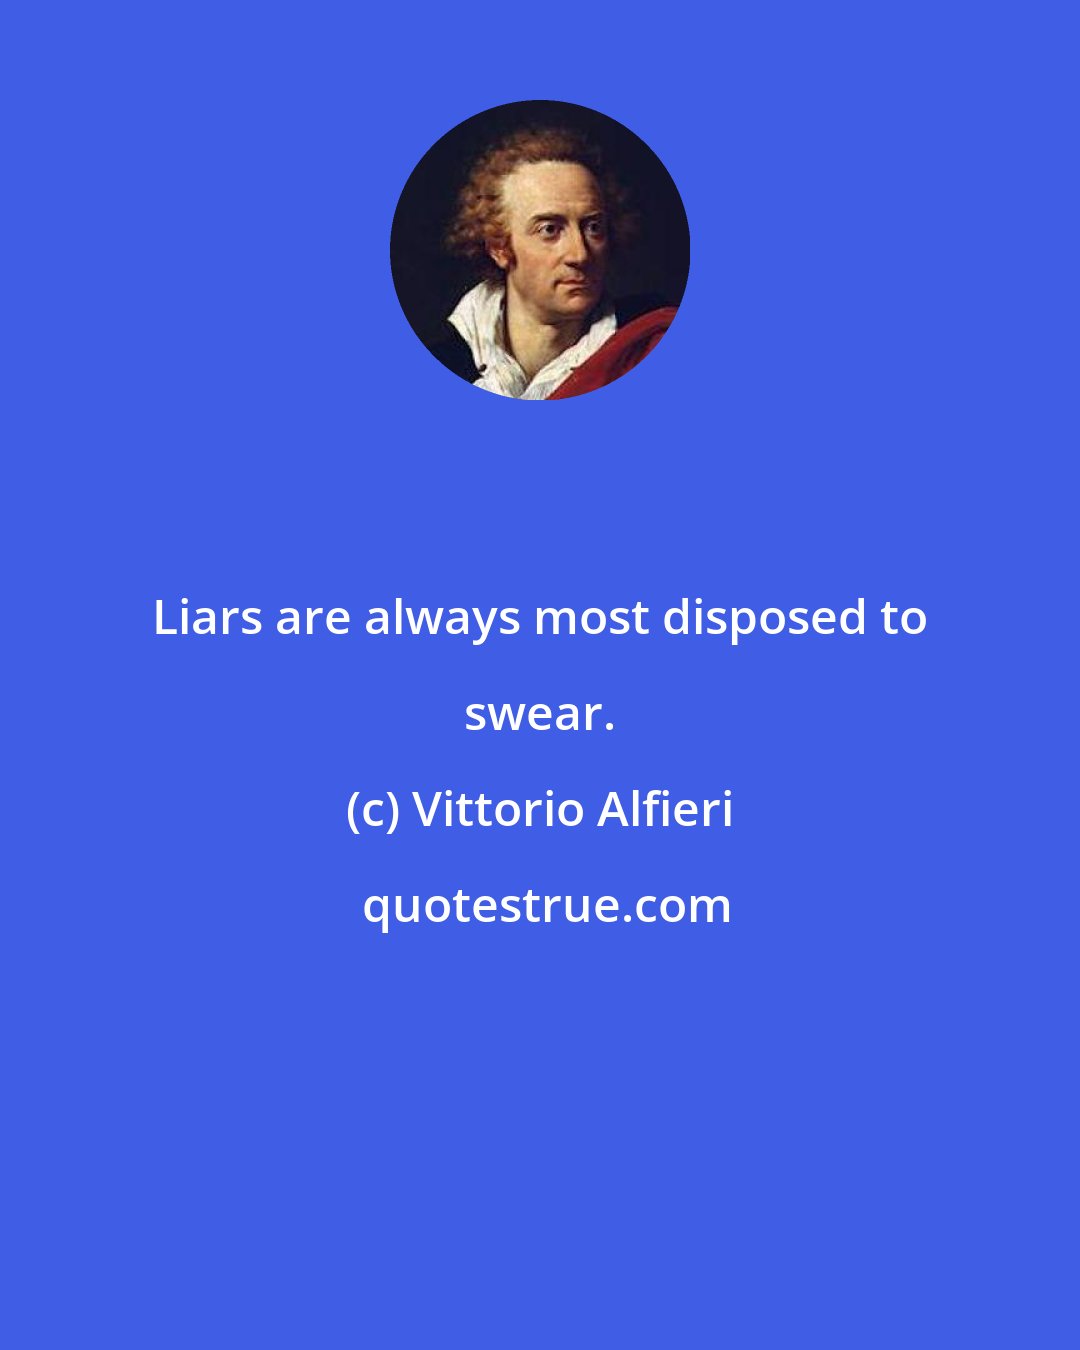 Vittorio Alfieri: Liars are always most disposed to swear.